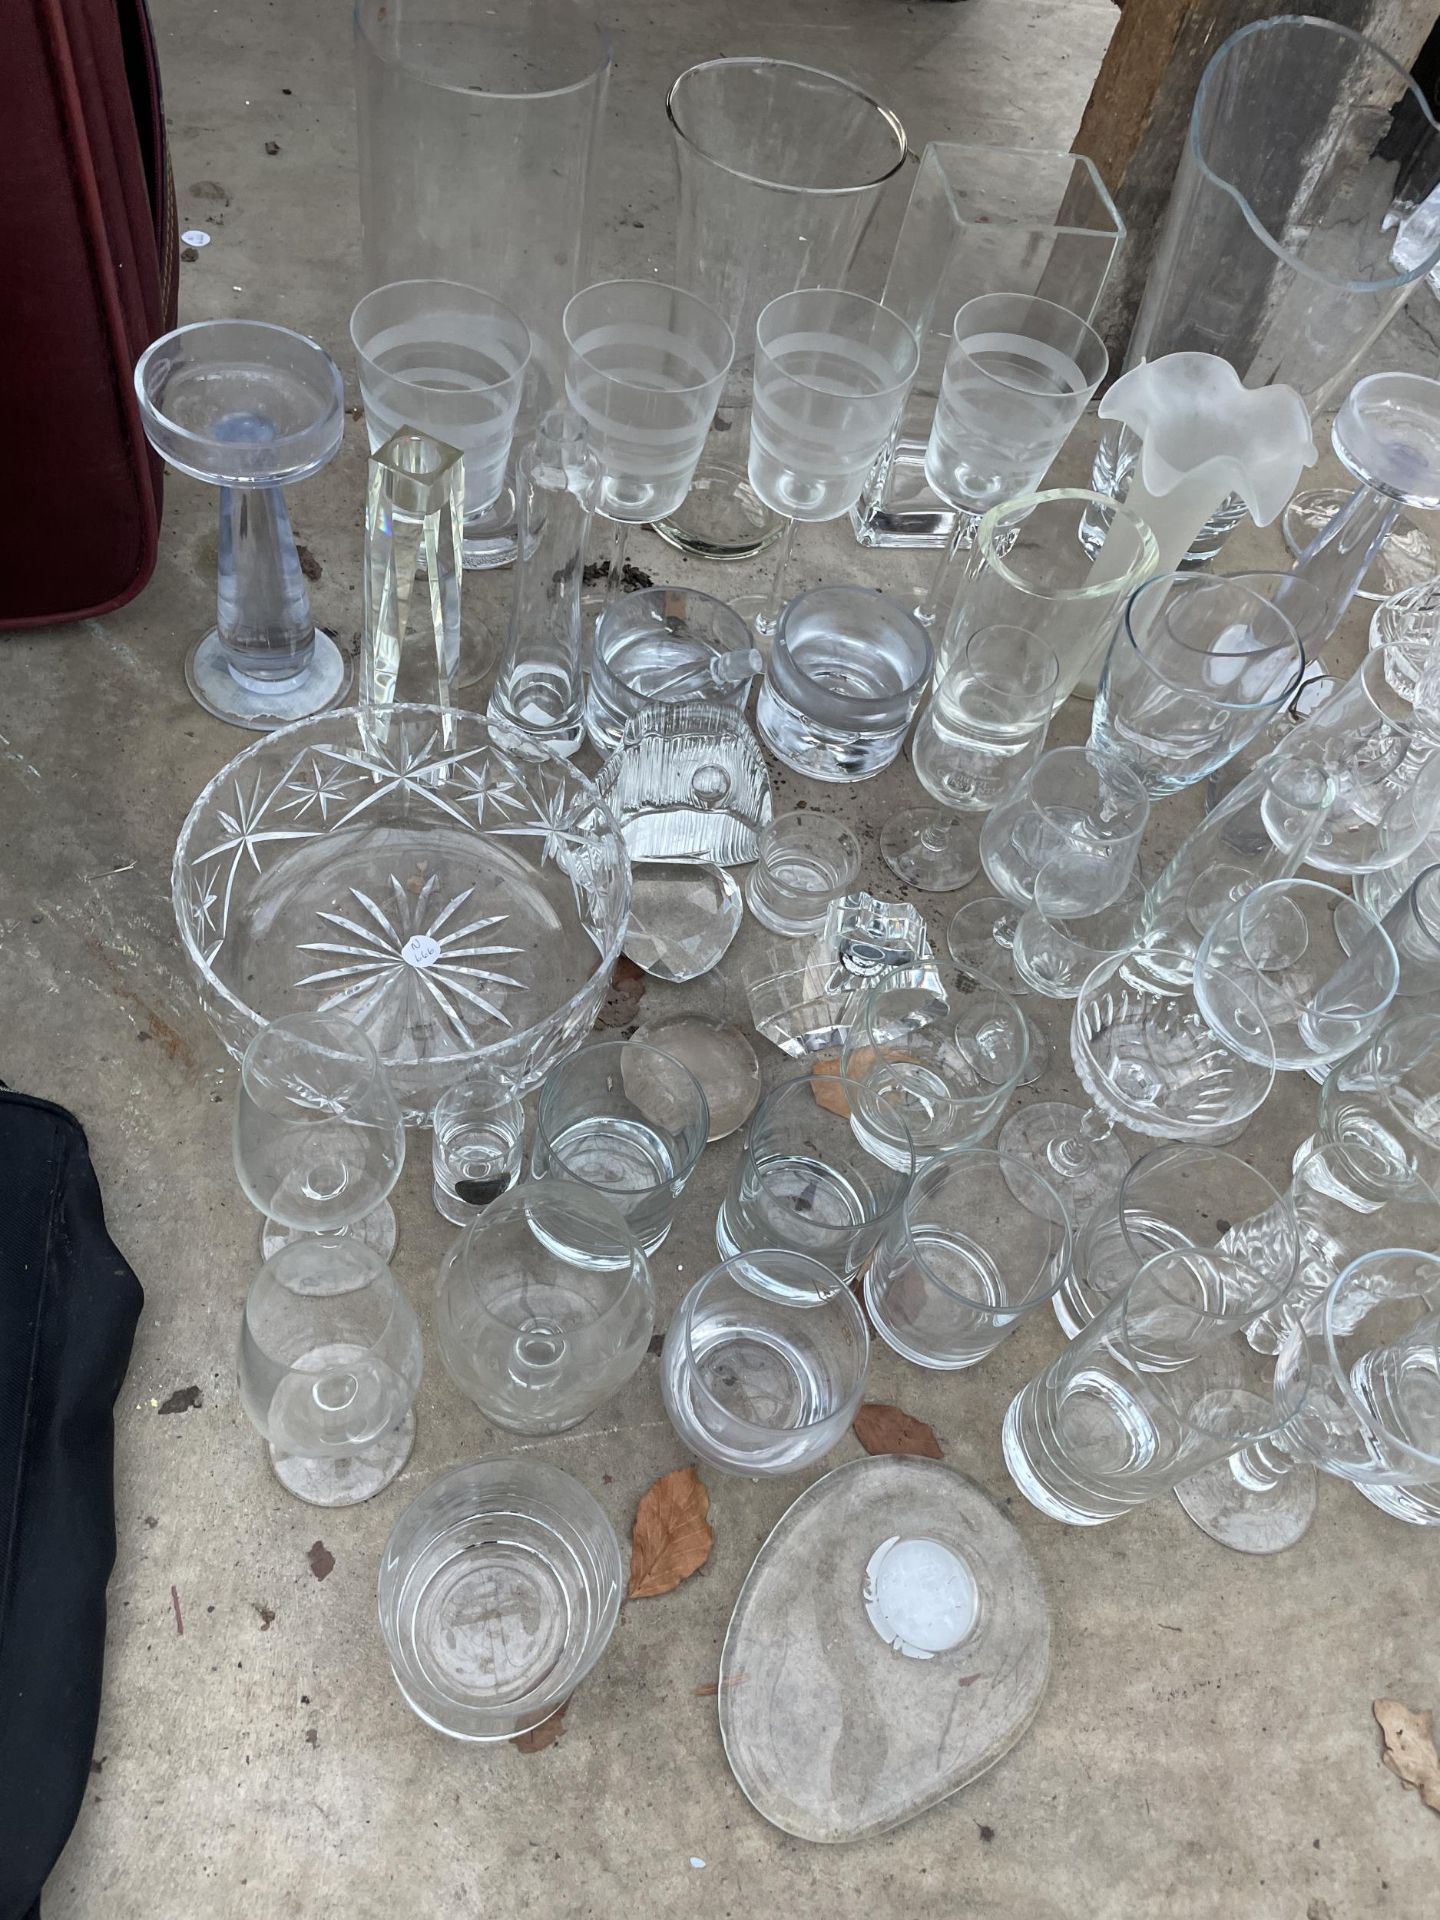 A LARGE ASSORTMENT OF GLASS WARE TO INCLUDE BOWLS, VASES AND DRINKING GLASSES ETC - Image 2 of 3